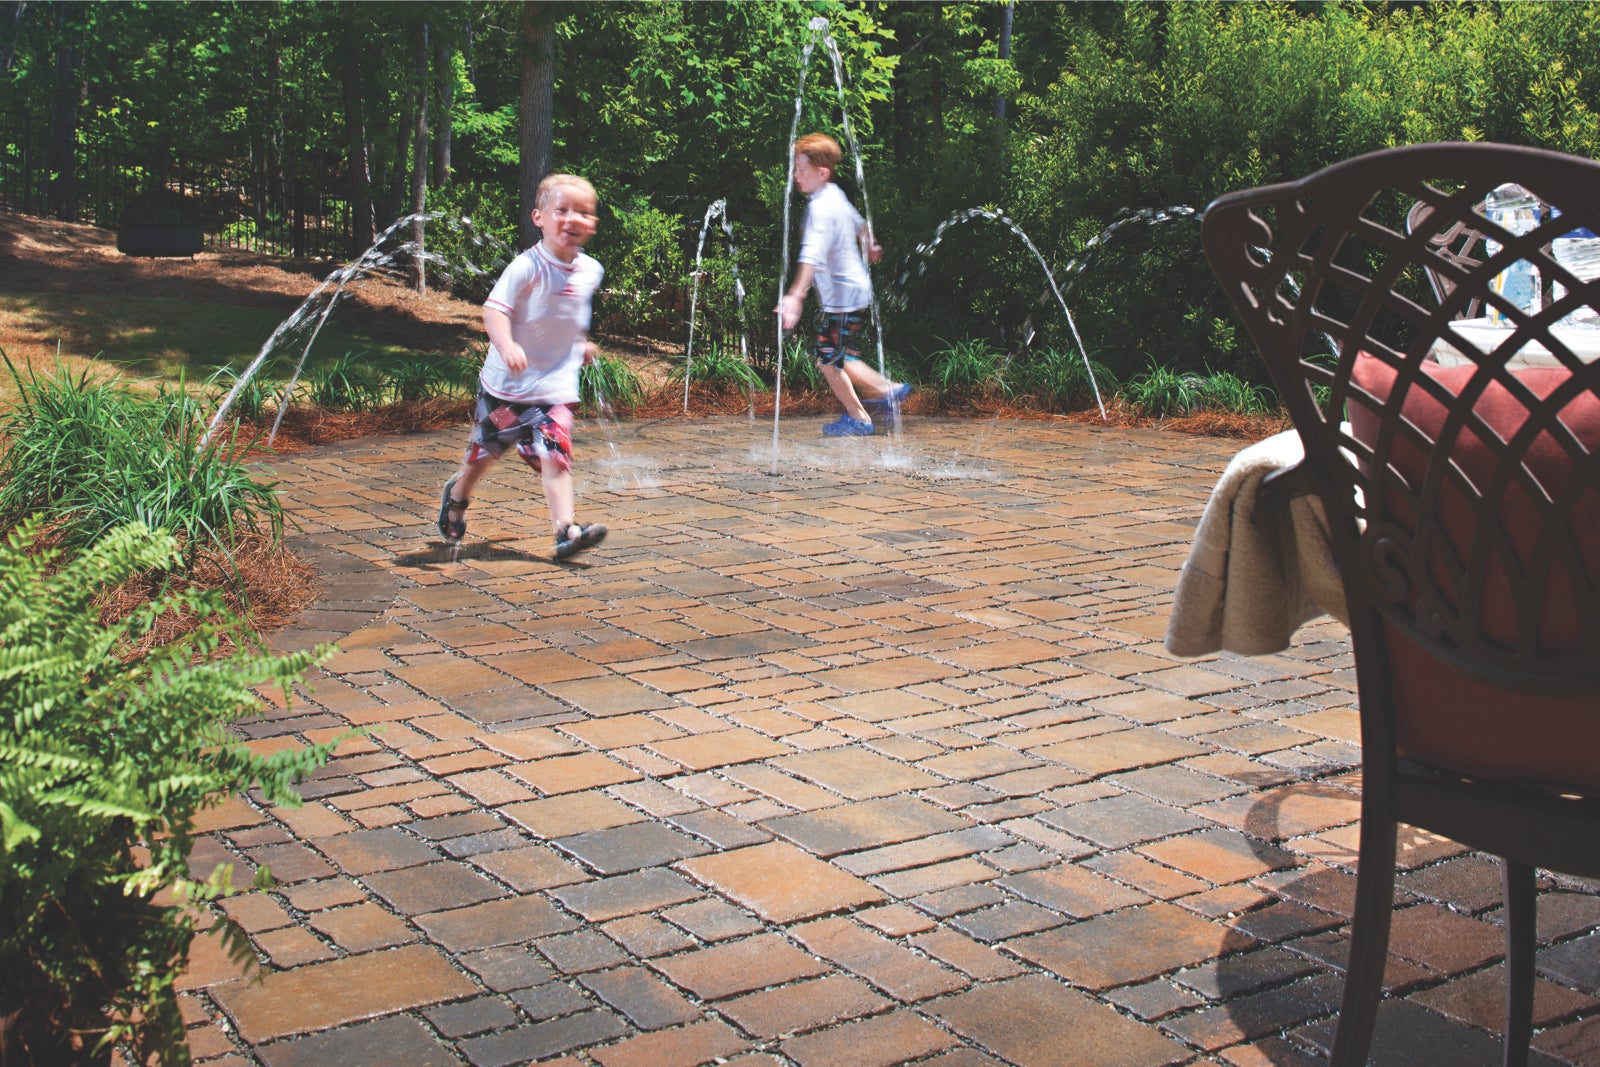 A permeable paver system, like this Subterra Stone® patio, can be designed to include a collection cistern and a pump to harvest water for reuse with water features, irrigation or other greywater uses.